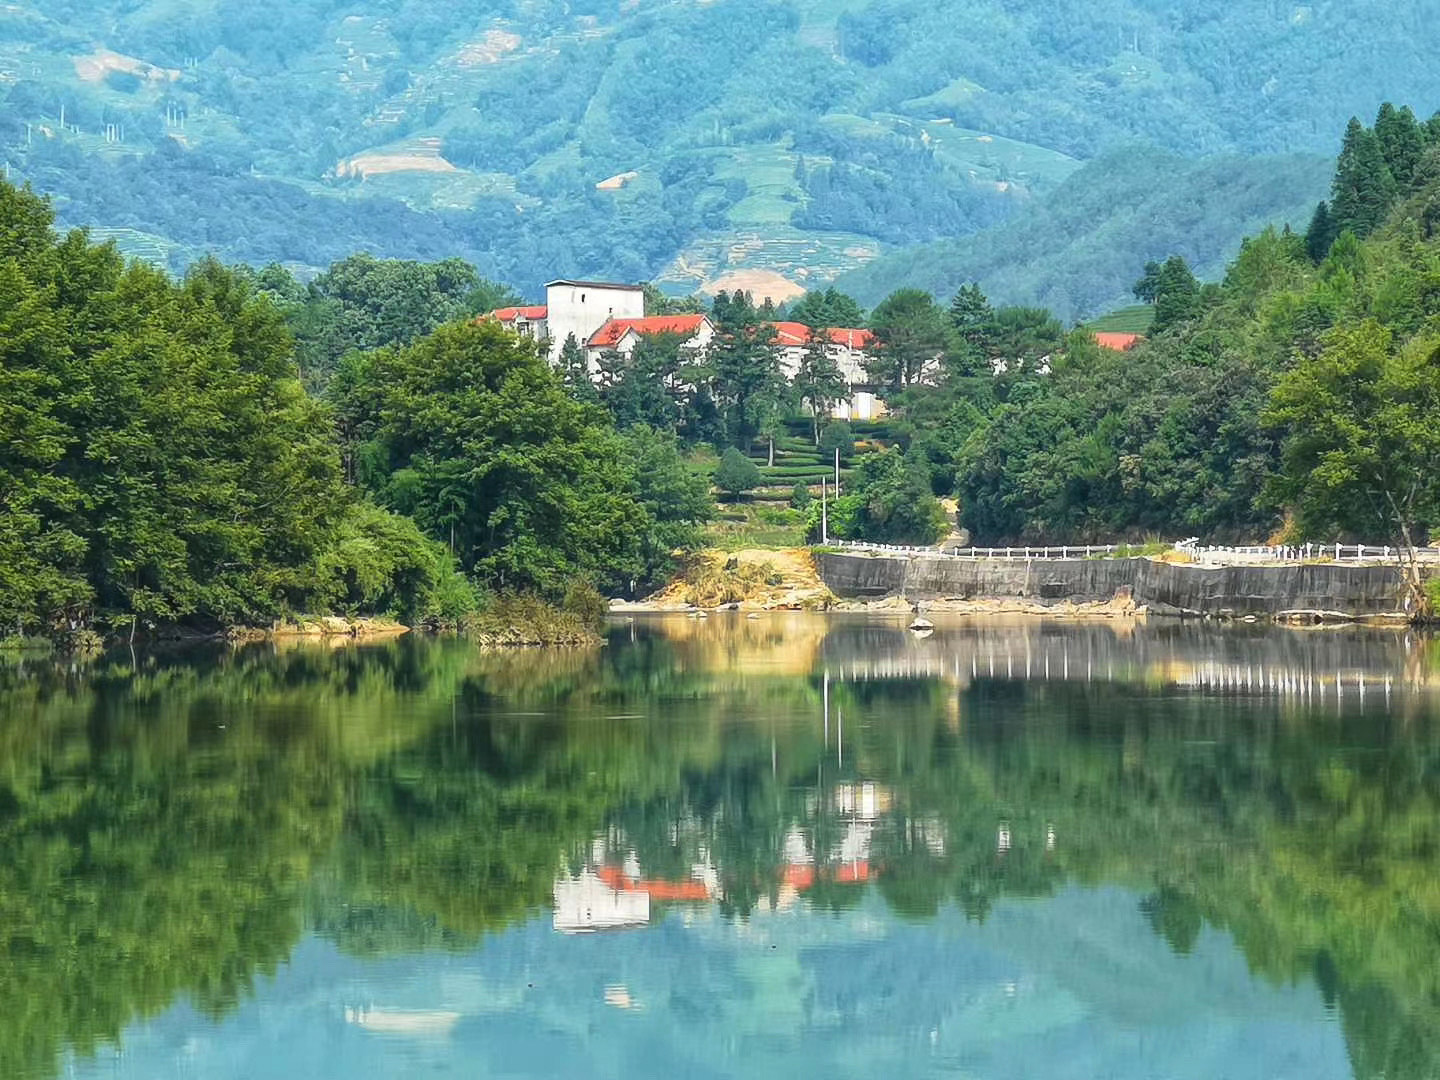 Looking across a river to the red roofs and white walls of a tea factory on a hillside half hidden by trees, surrounded by heavily forested hills and tea terraces.